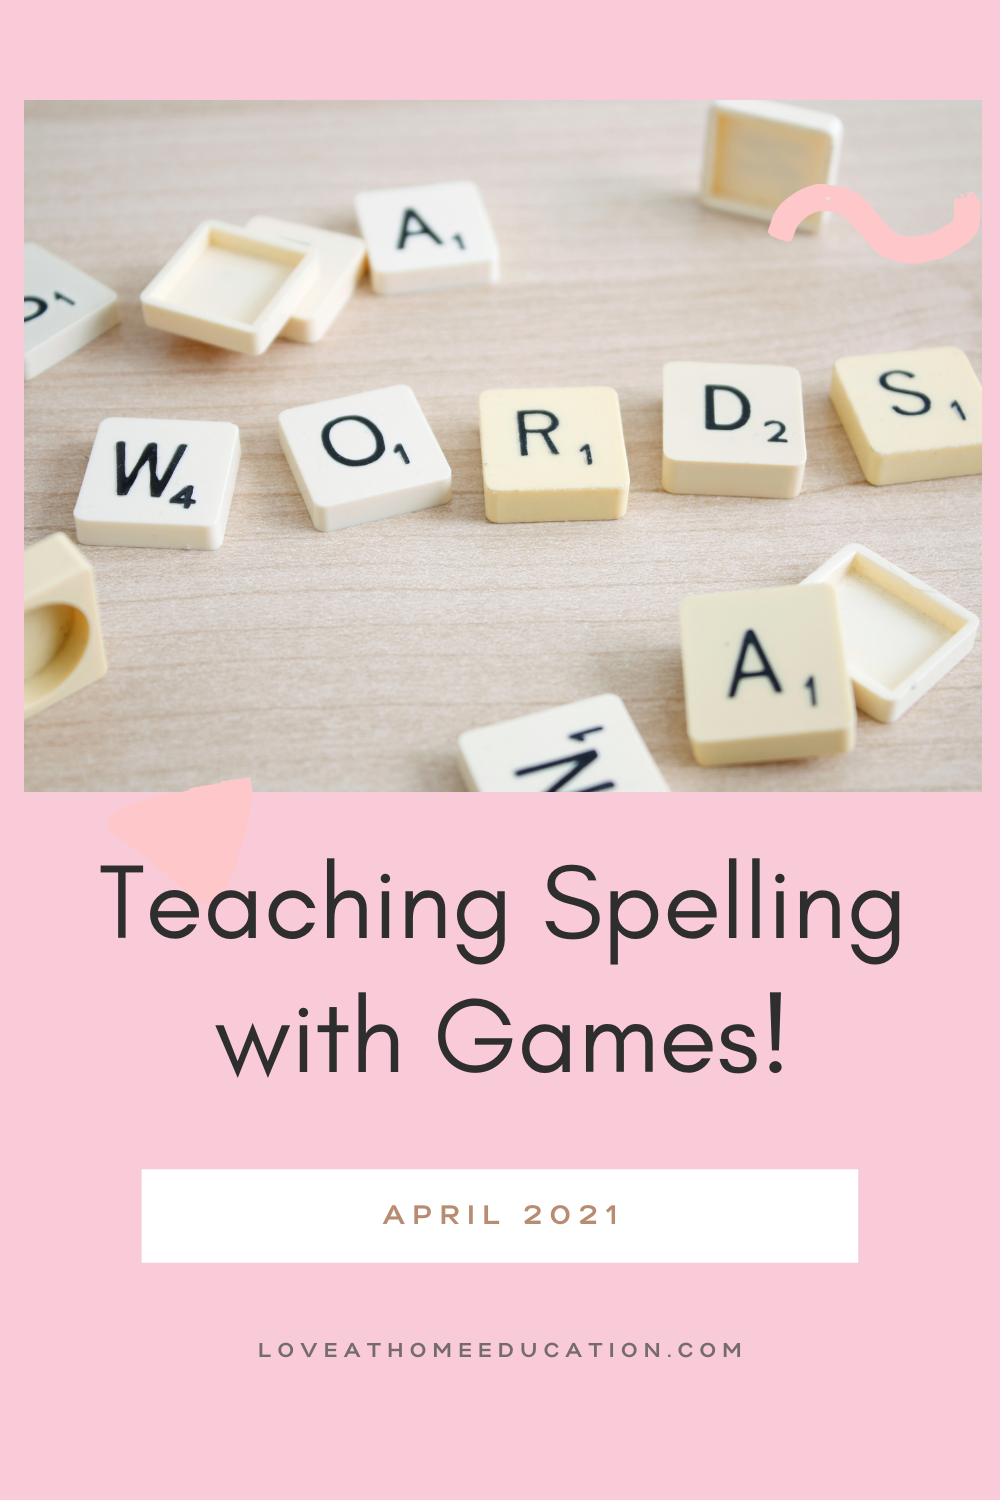 Gameschooling with Language Arts! How We Teach Spelling and Grammar with Games!